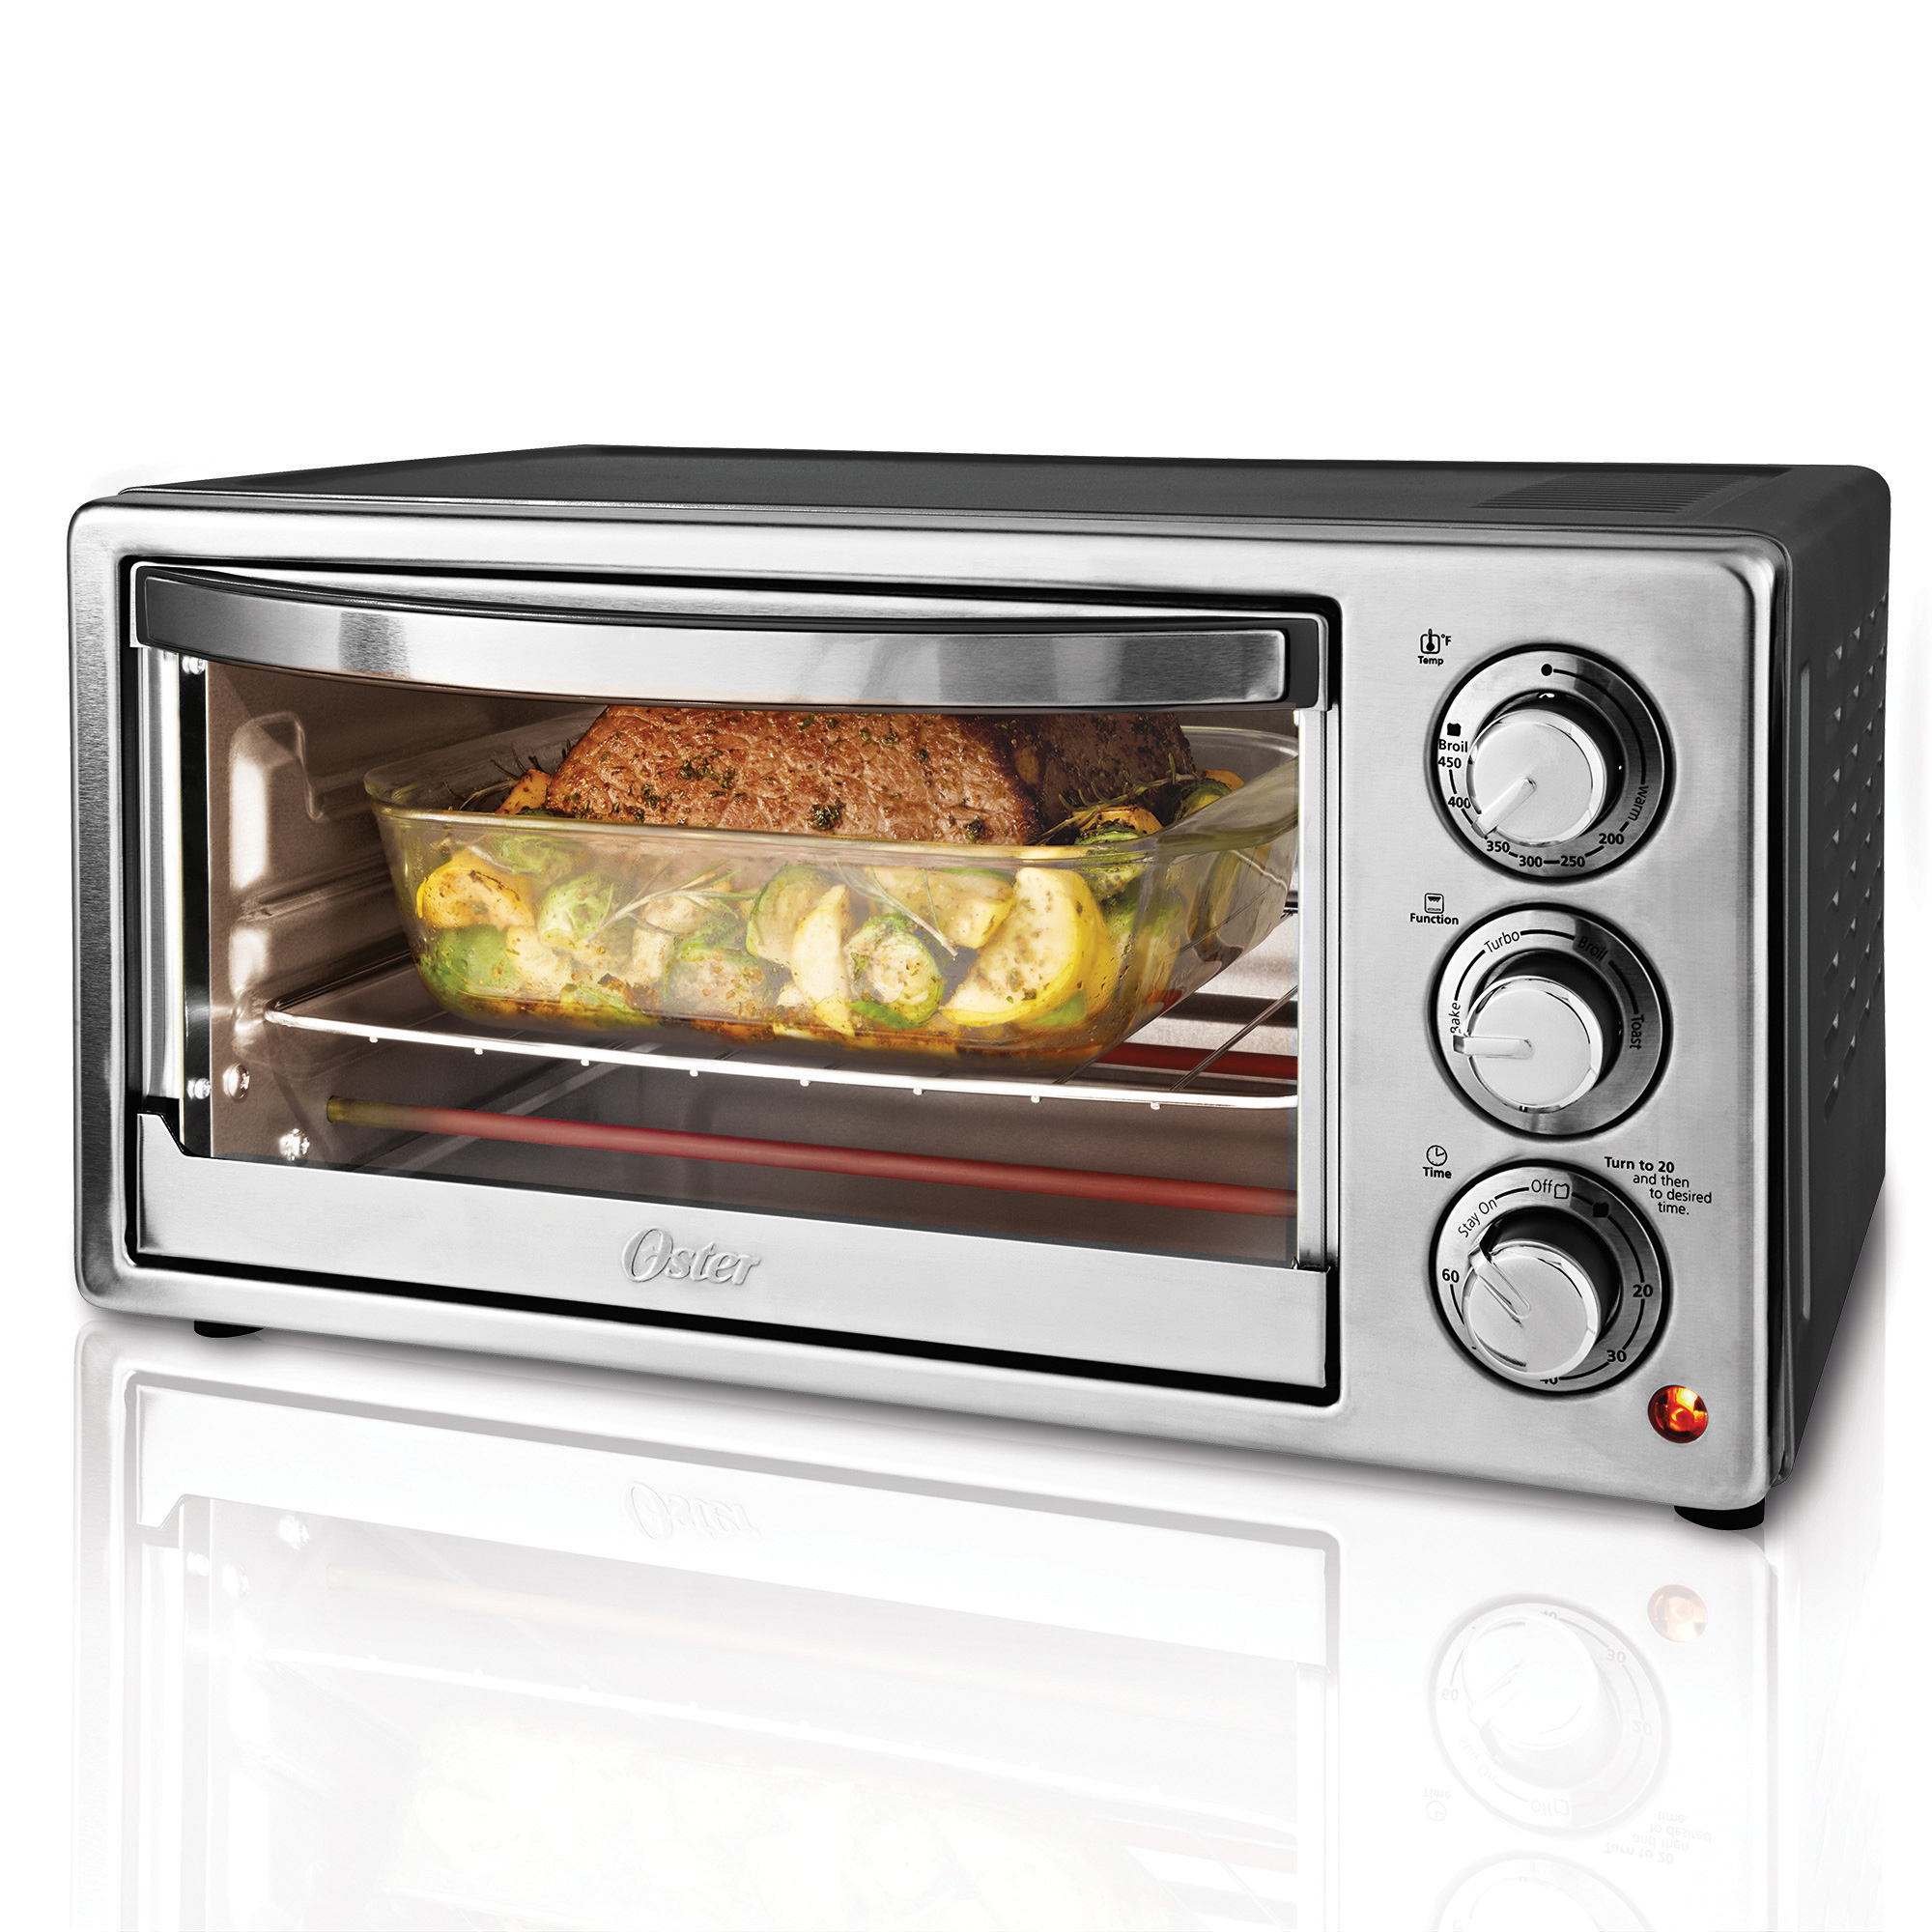 Oster, OSRTSSTTVF817, Toaster Oven, 1, Gray - image 2 of 2